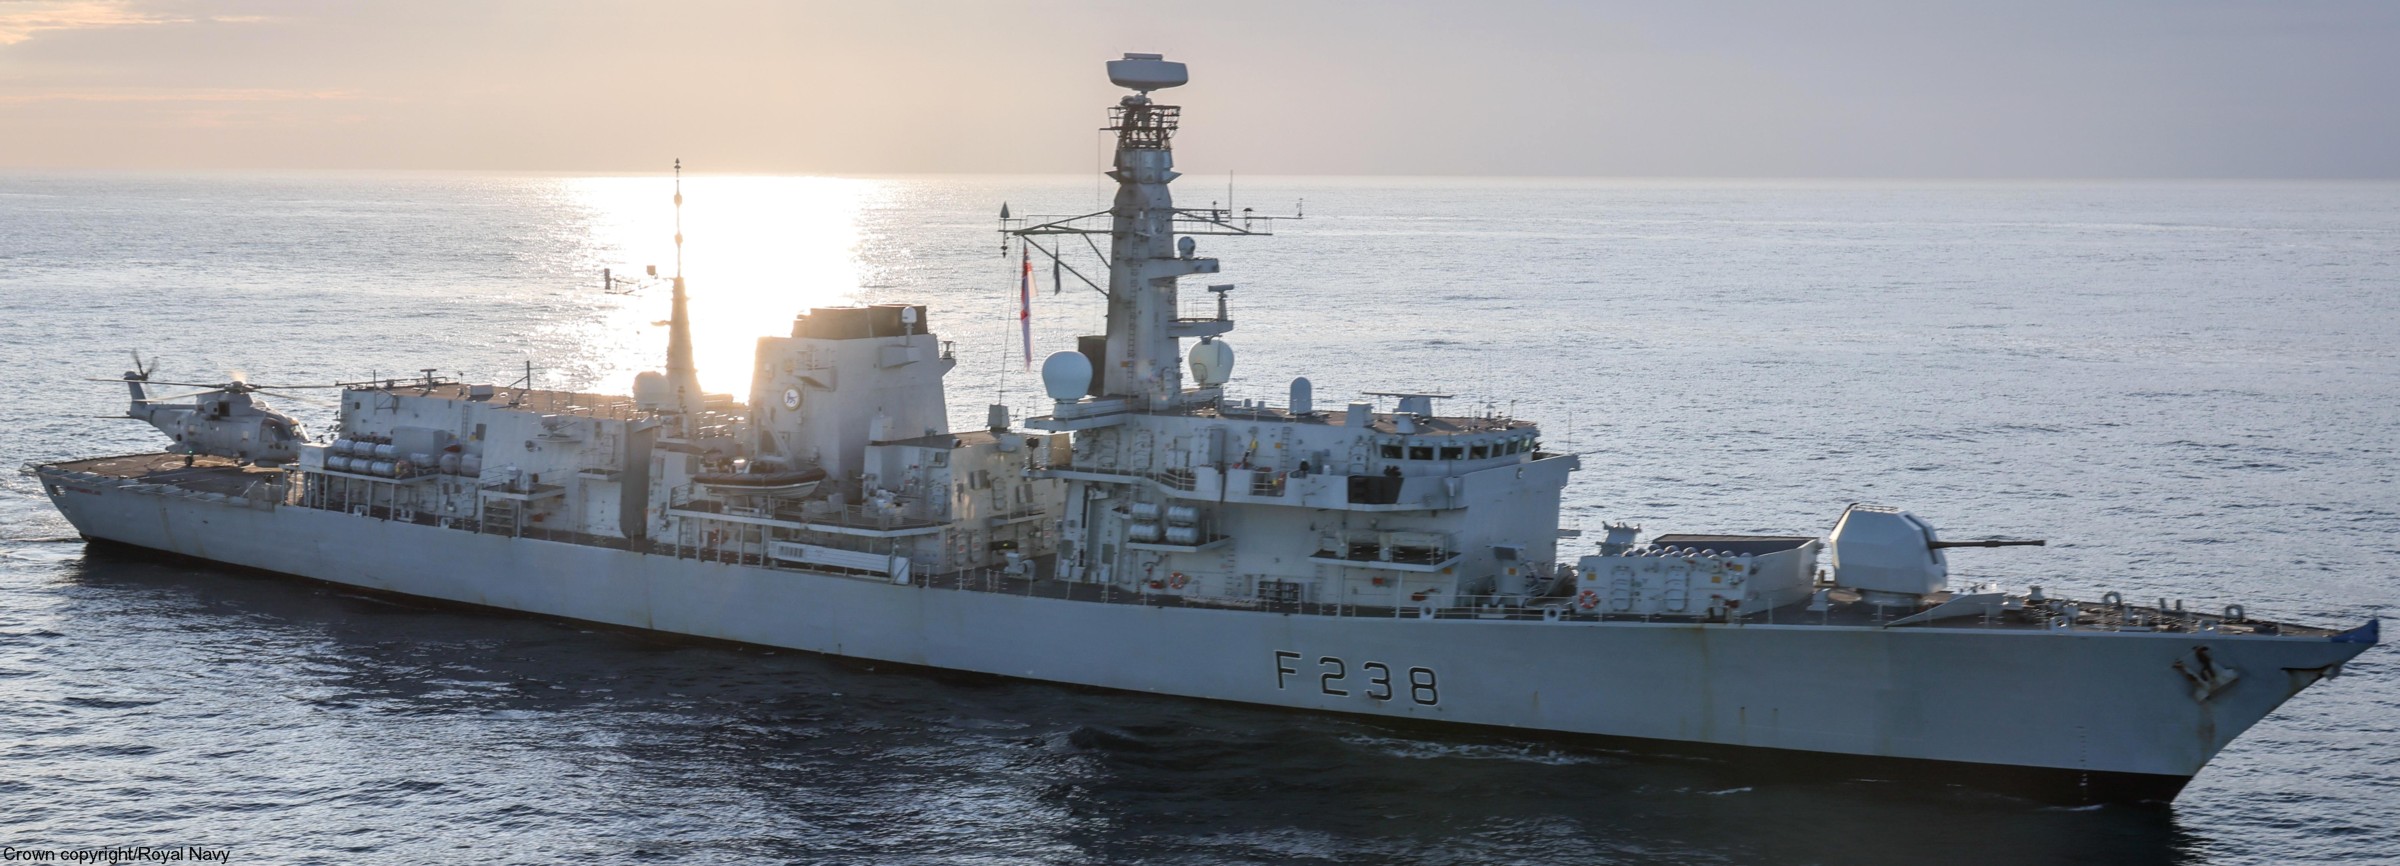 f-238 hms northumberland type 23 duke class guided missile frigate ffg royal navy 43